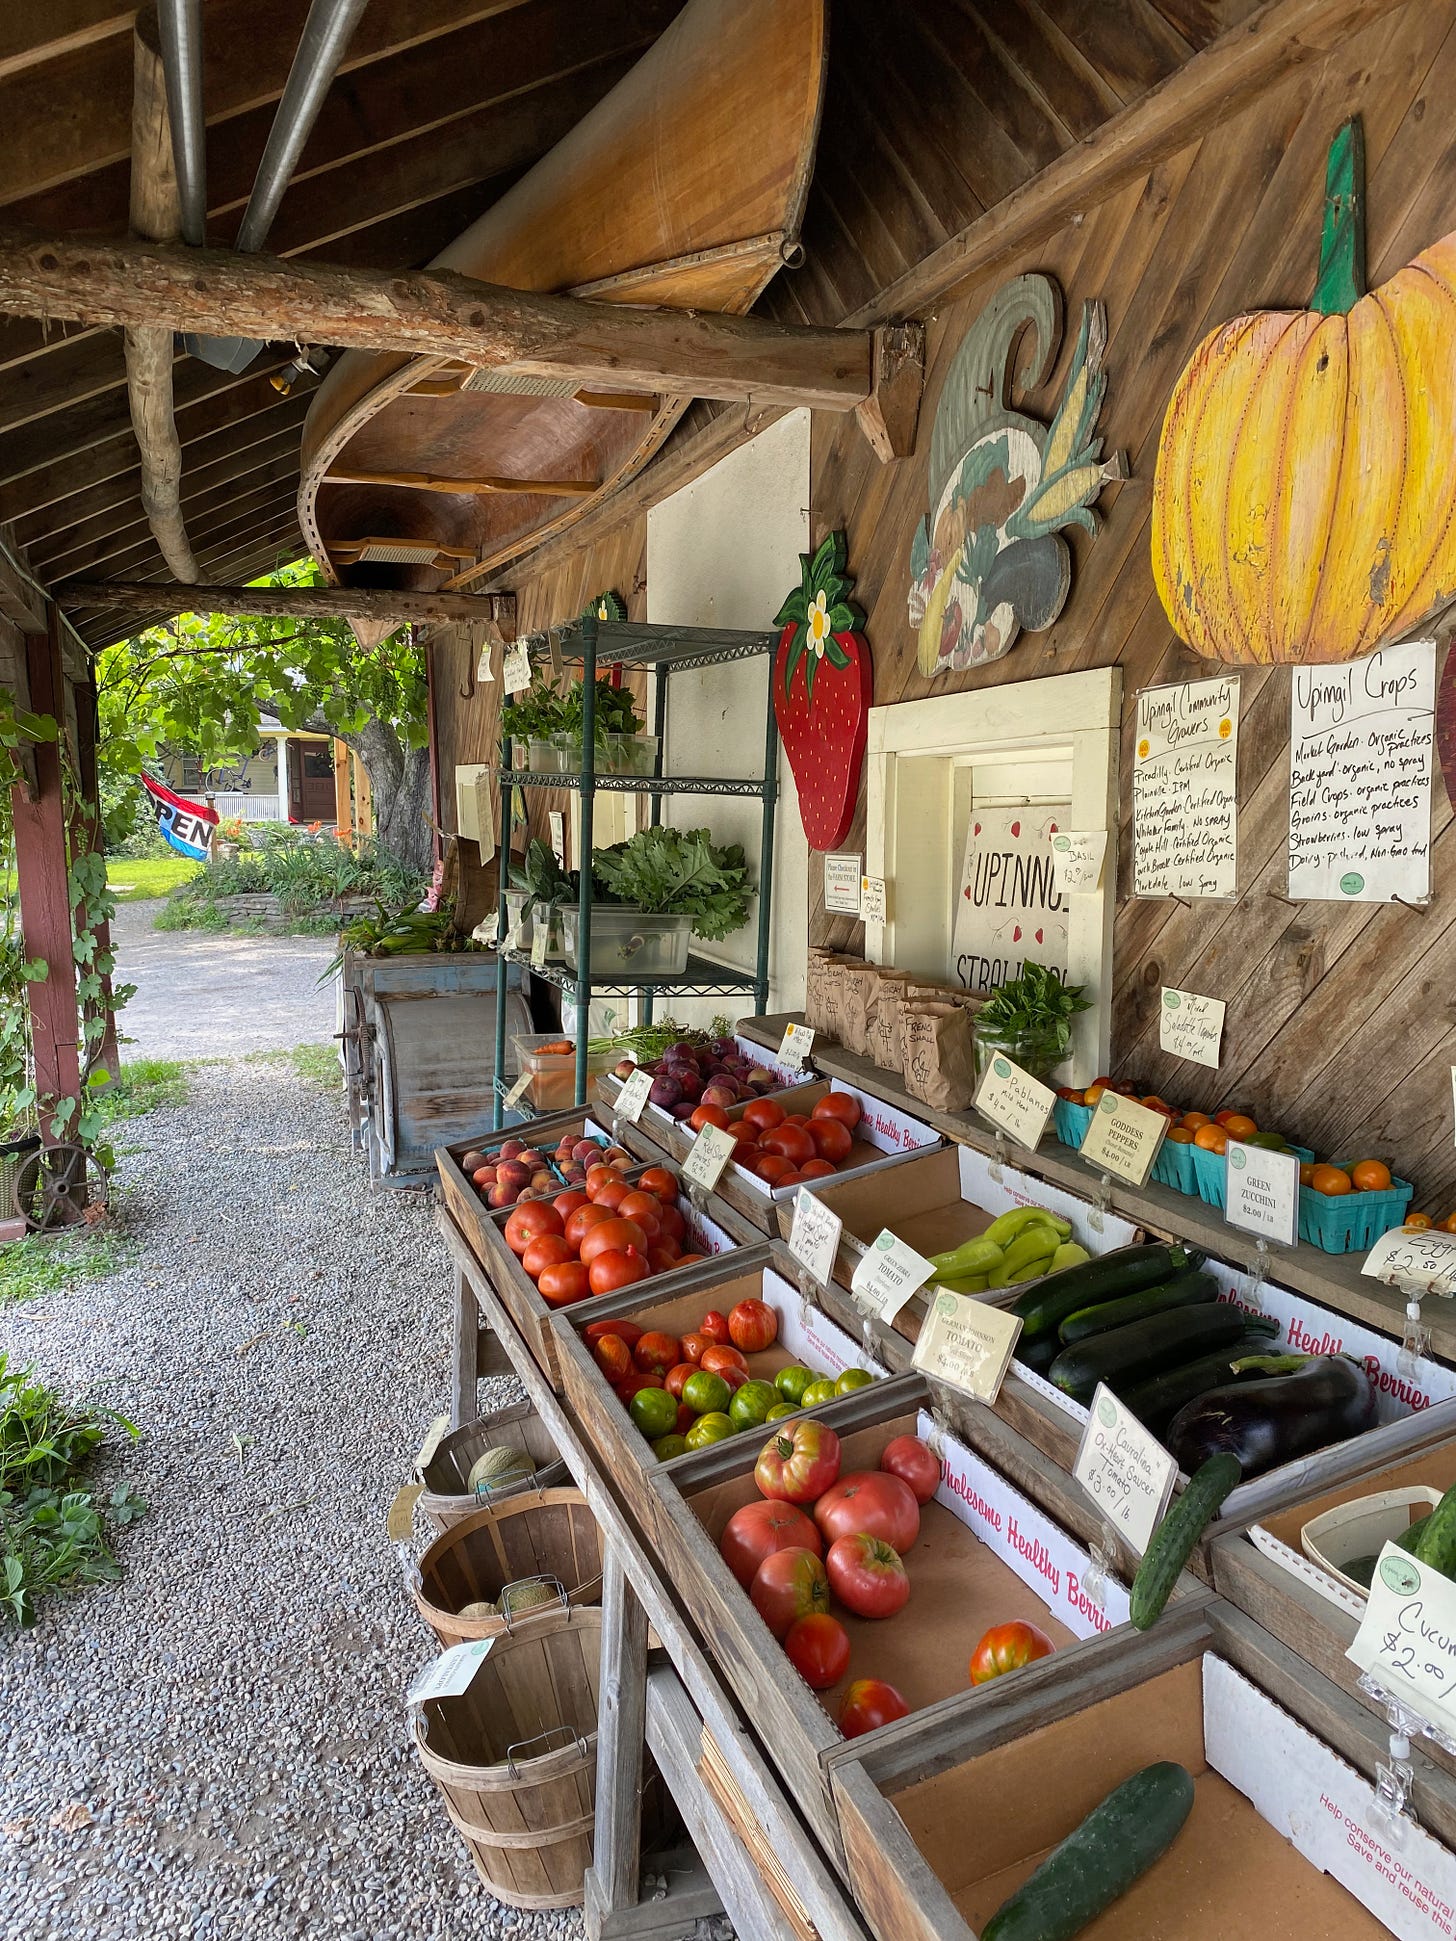 An outdoor farmstand, featuring bins and baskets of vegetables along a wall under an overhang, and a view of trees and an open sign in the distance.